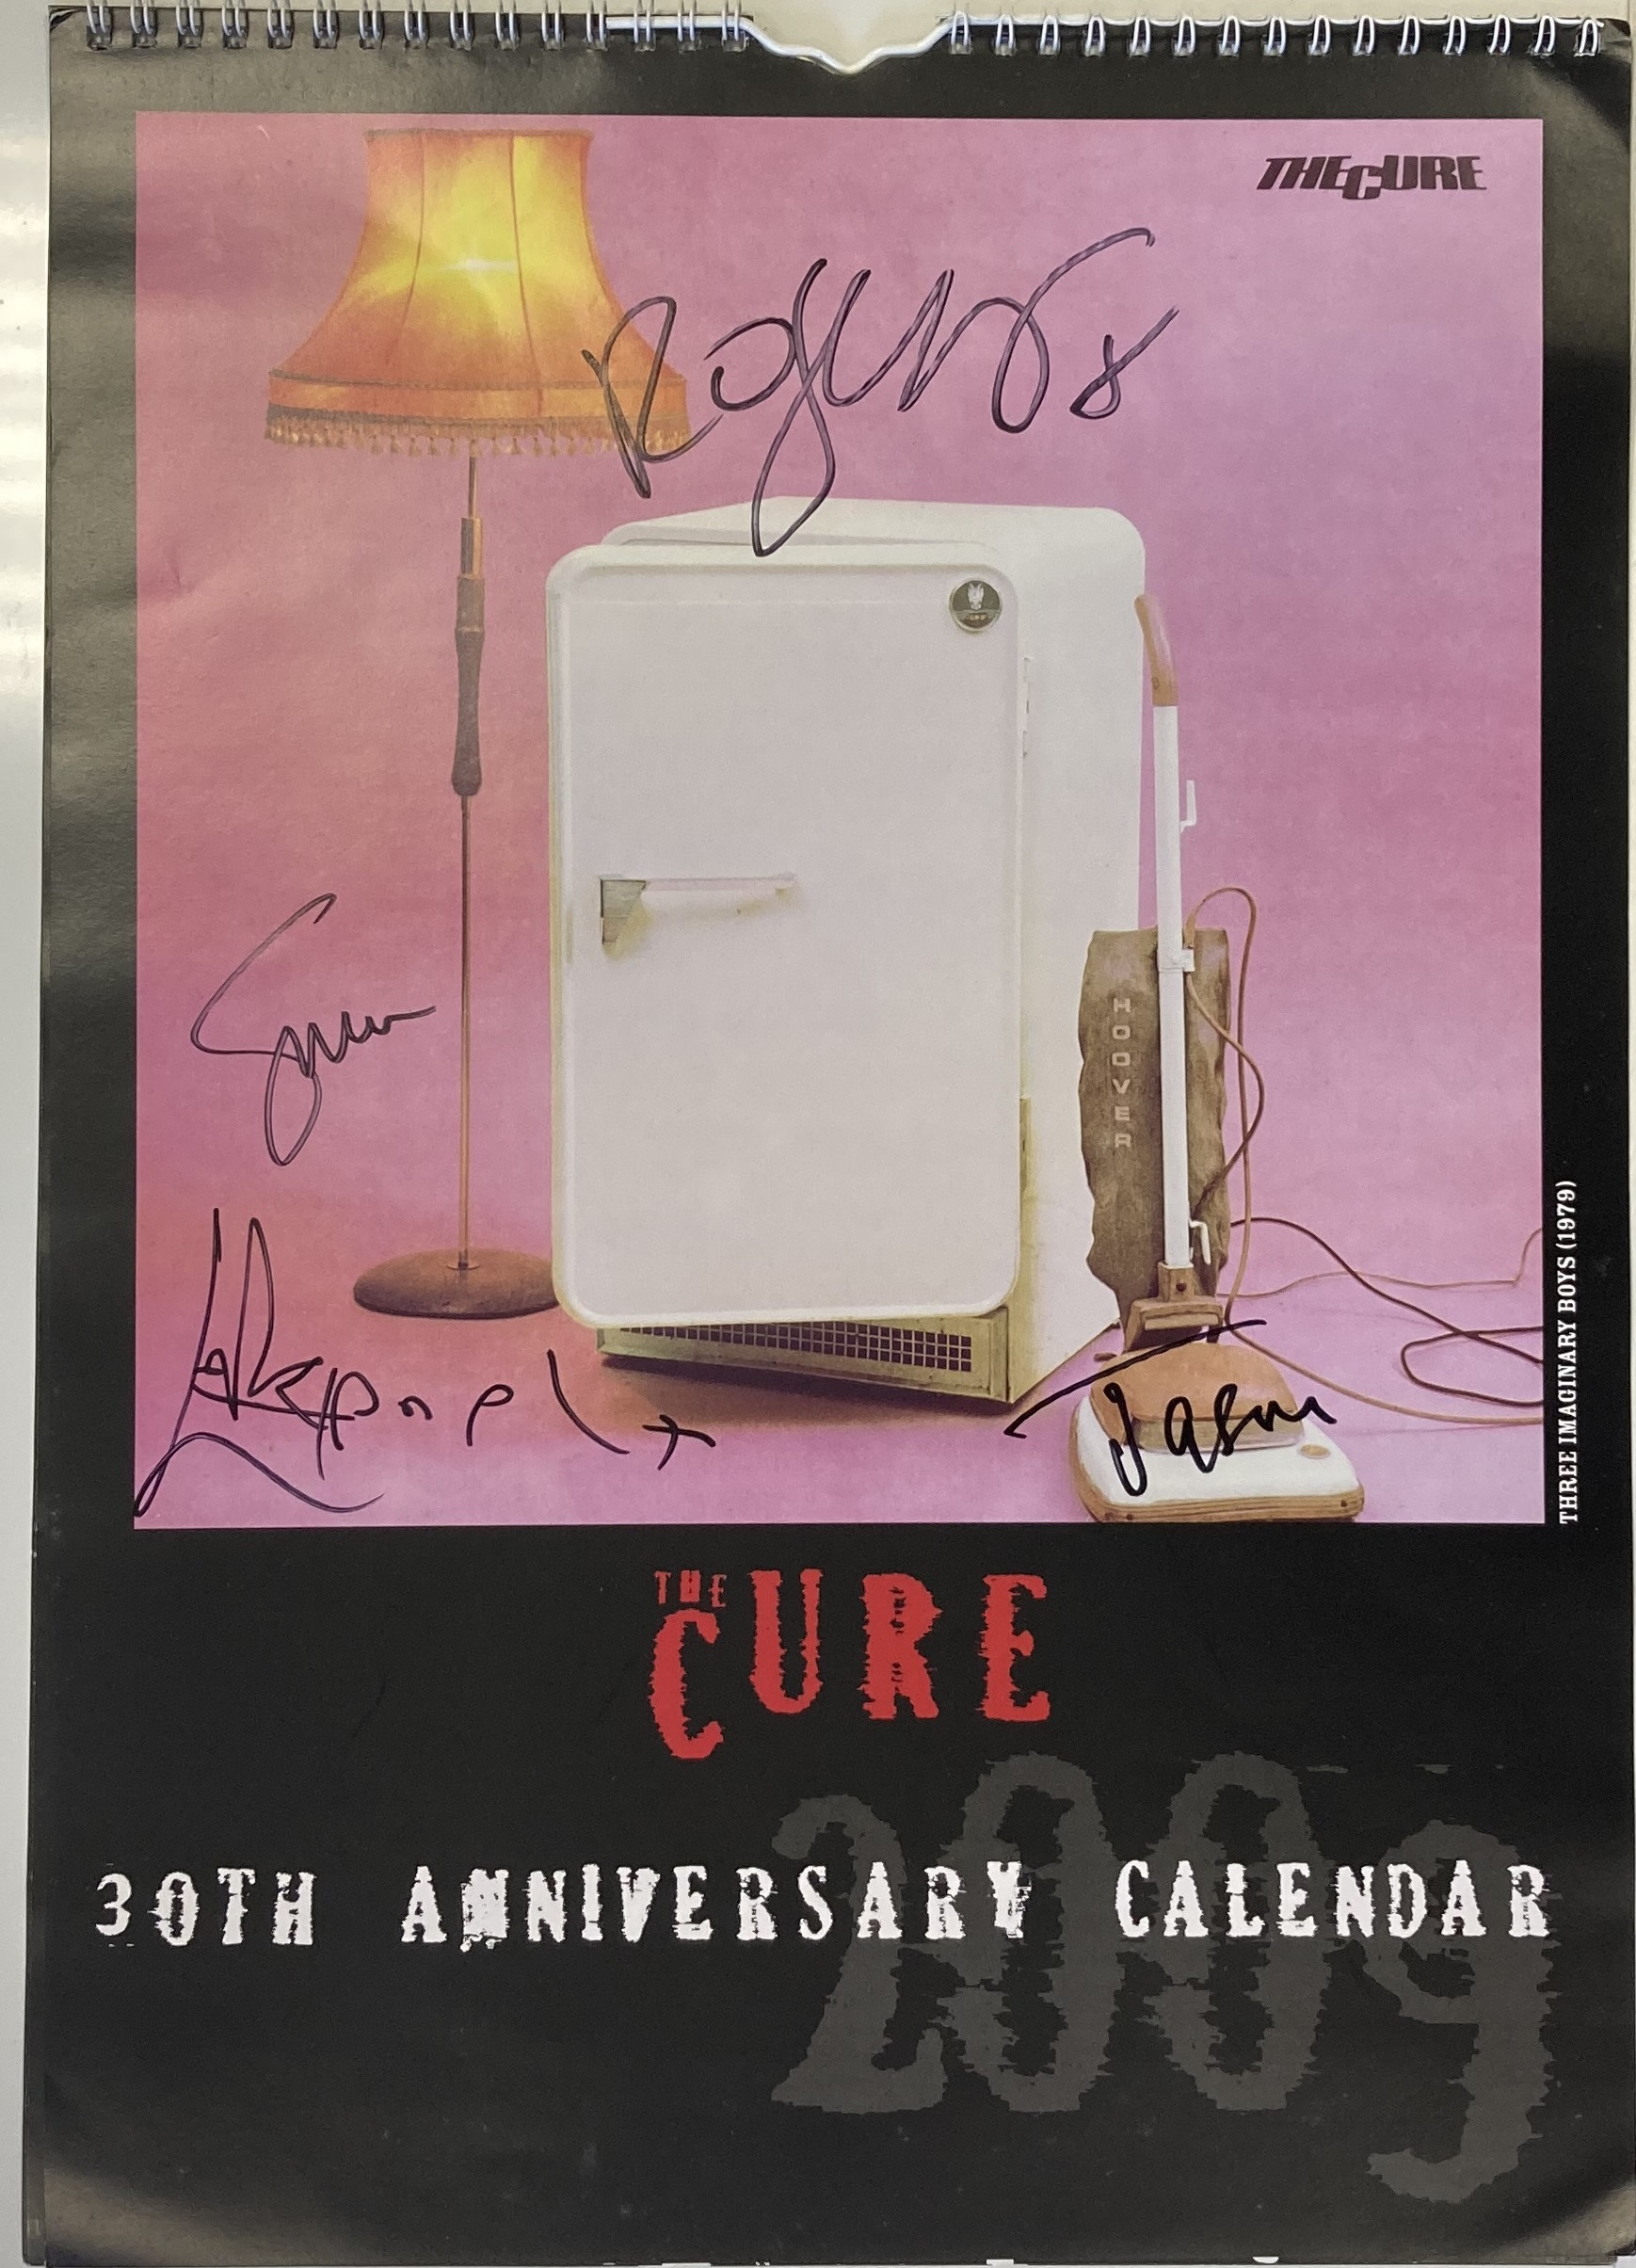 Lot 211 THE CURE SIGNED CALENDAR.